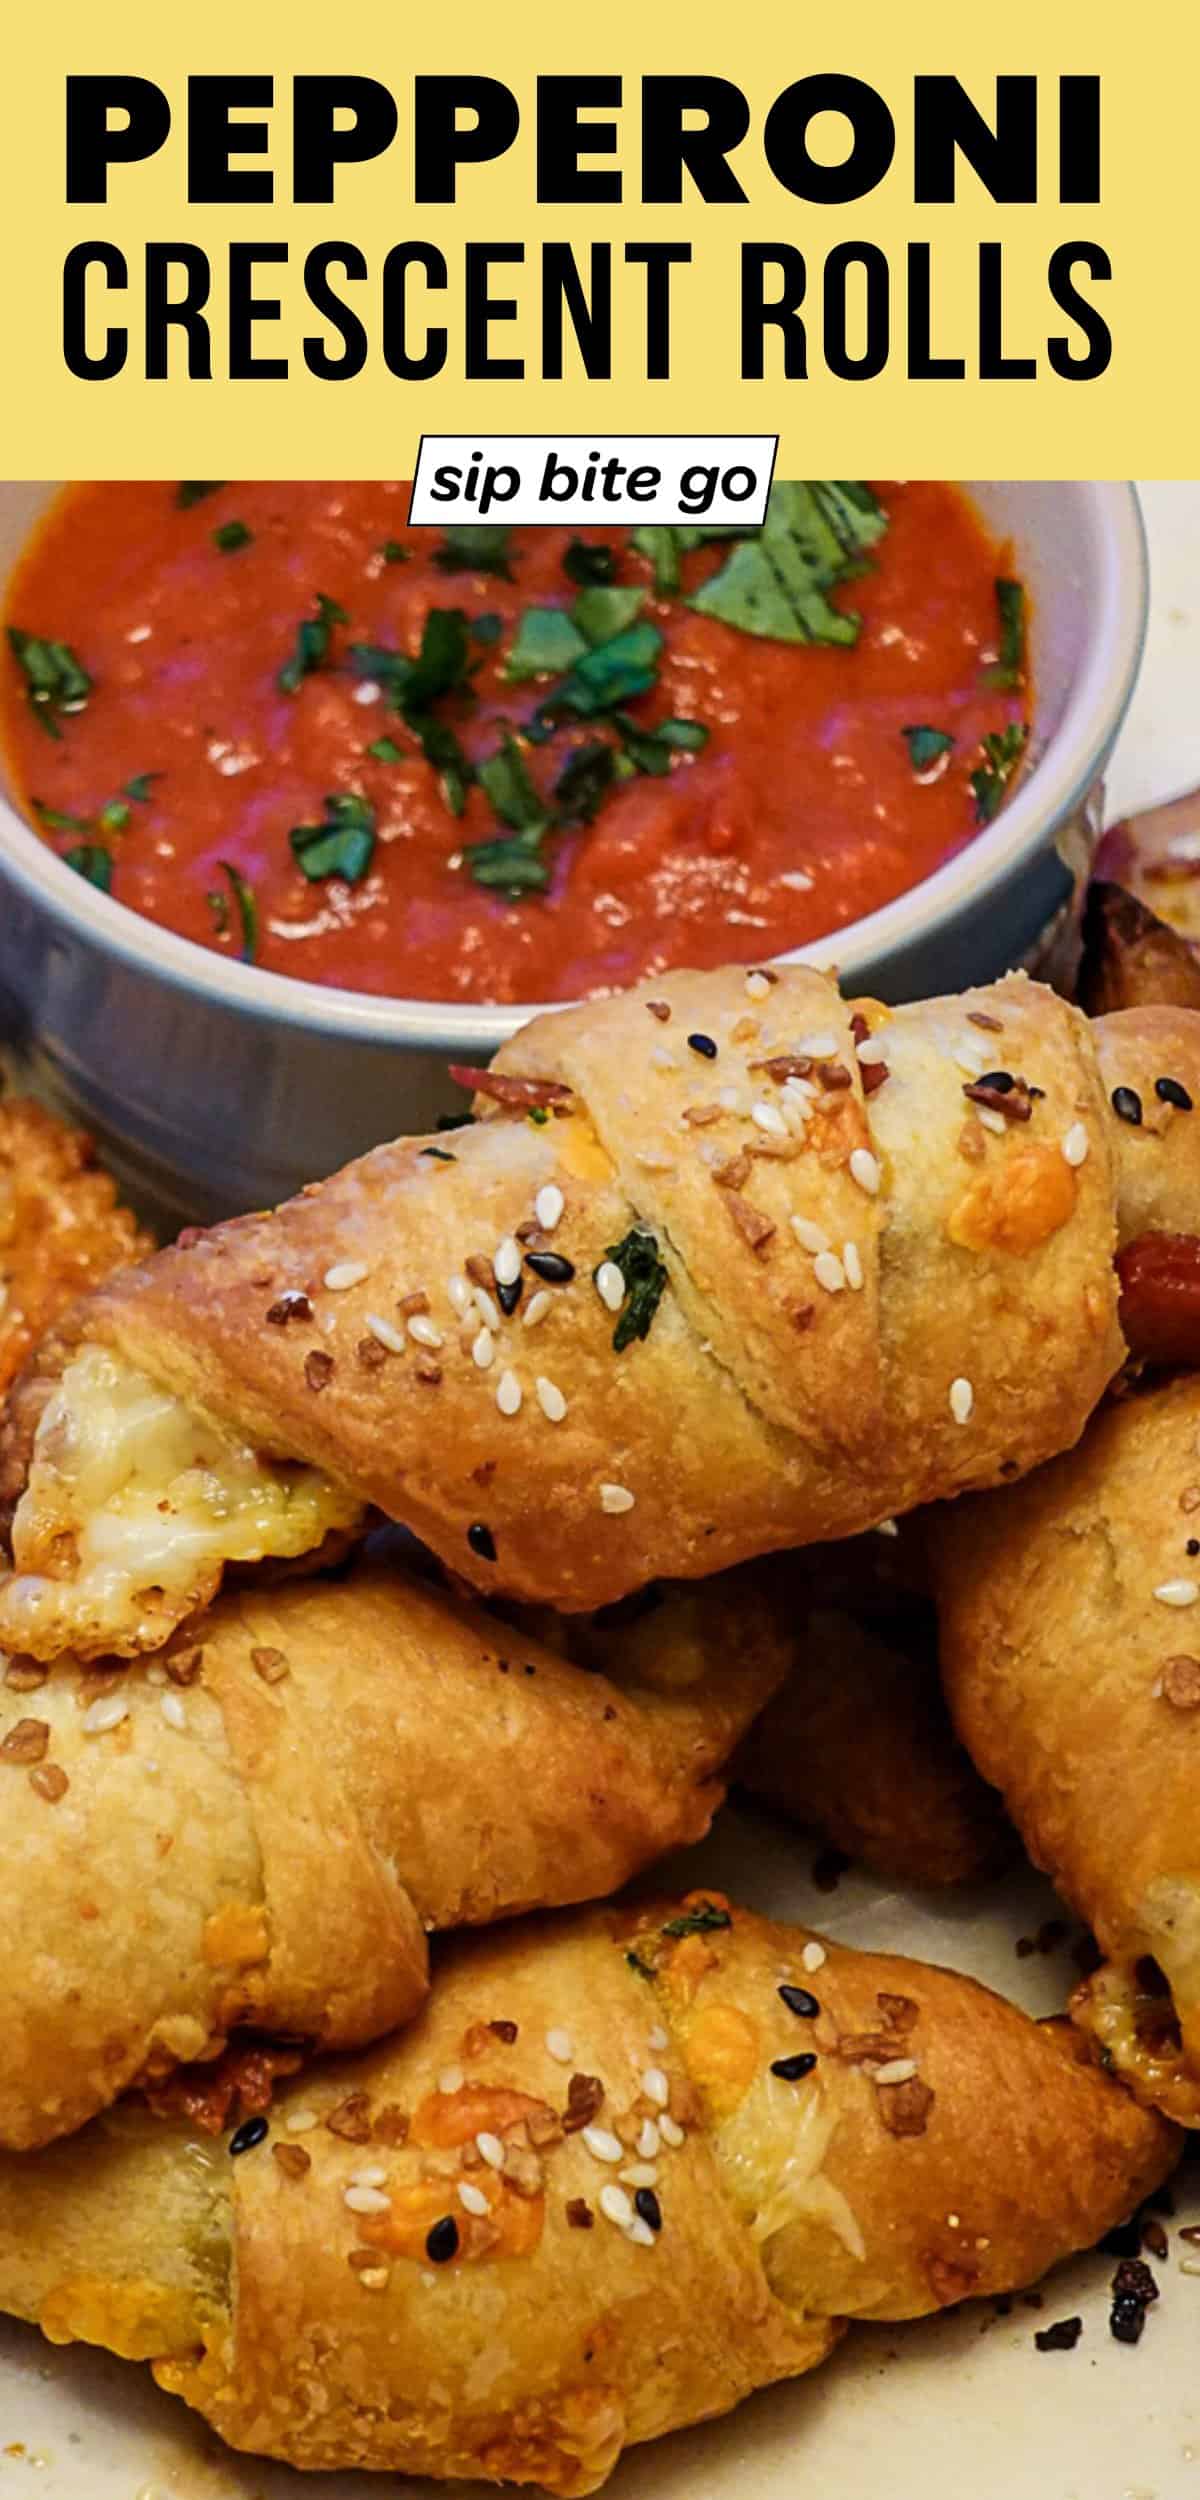 Pepperoni Crescent Rolls Recipe with text overlay